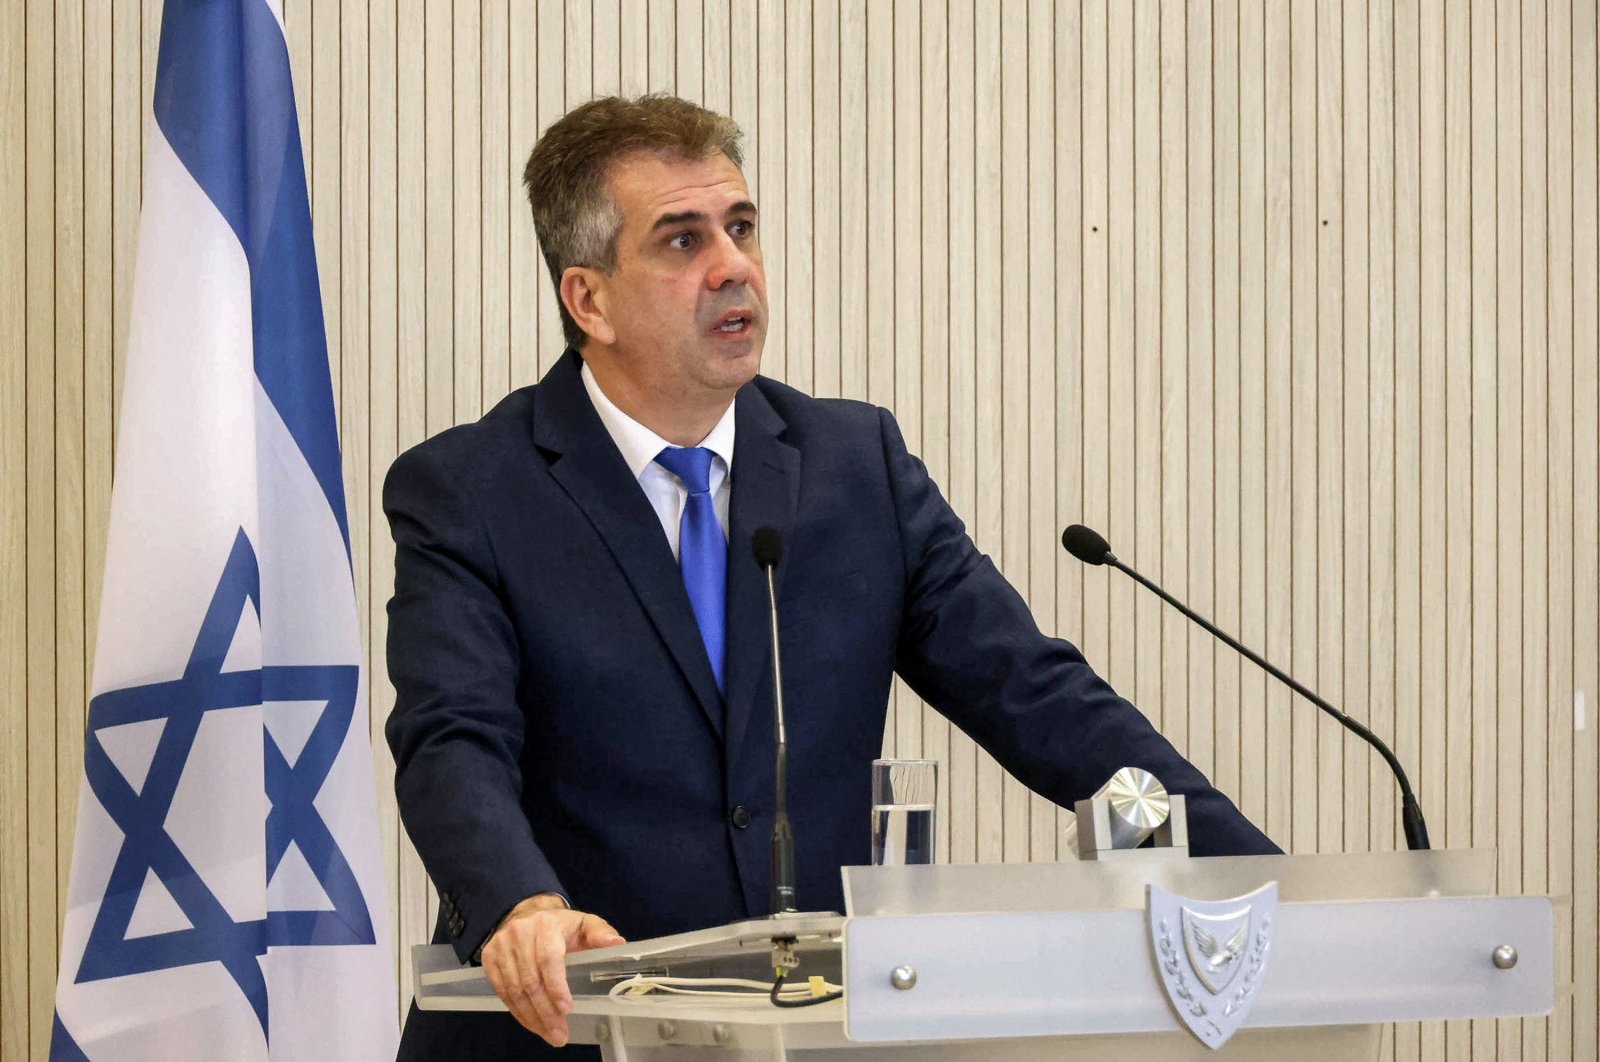 Israel&#039;s Foreign Minister Eli Cohen speaks during a joint news conference with his Greek Cypriot and Greek counterparts following their trilateral meeting at the foreign ministry headquarters in Nicosia, Greek Cyprus, on March 31, 2023. (AFP Photo)